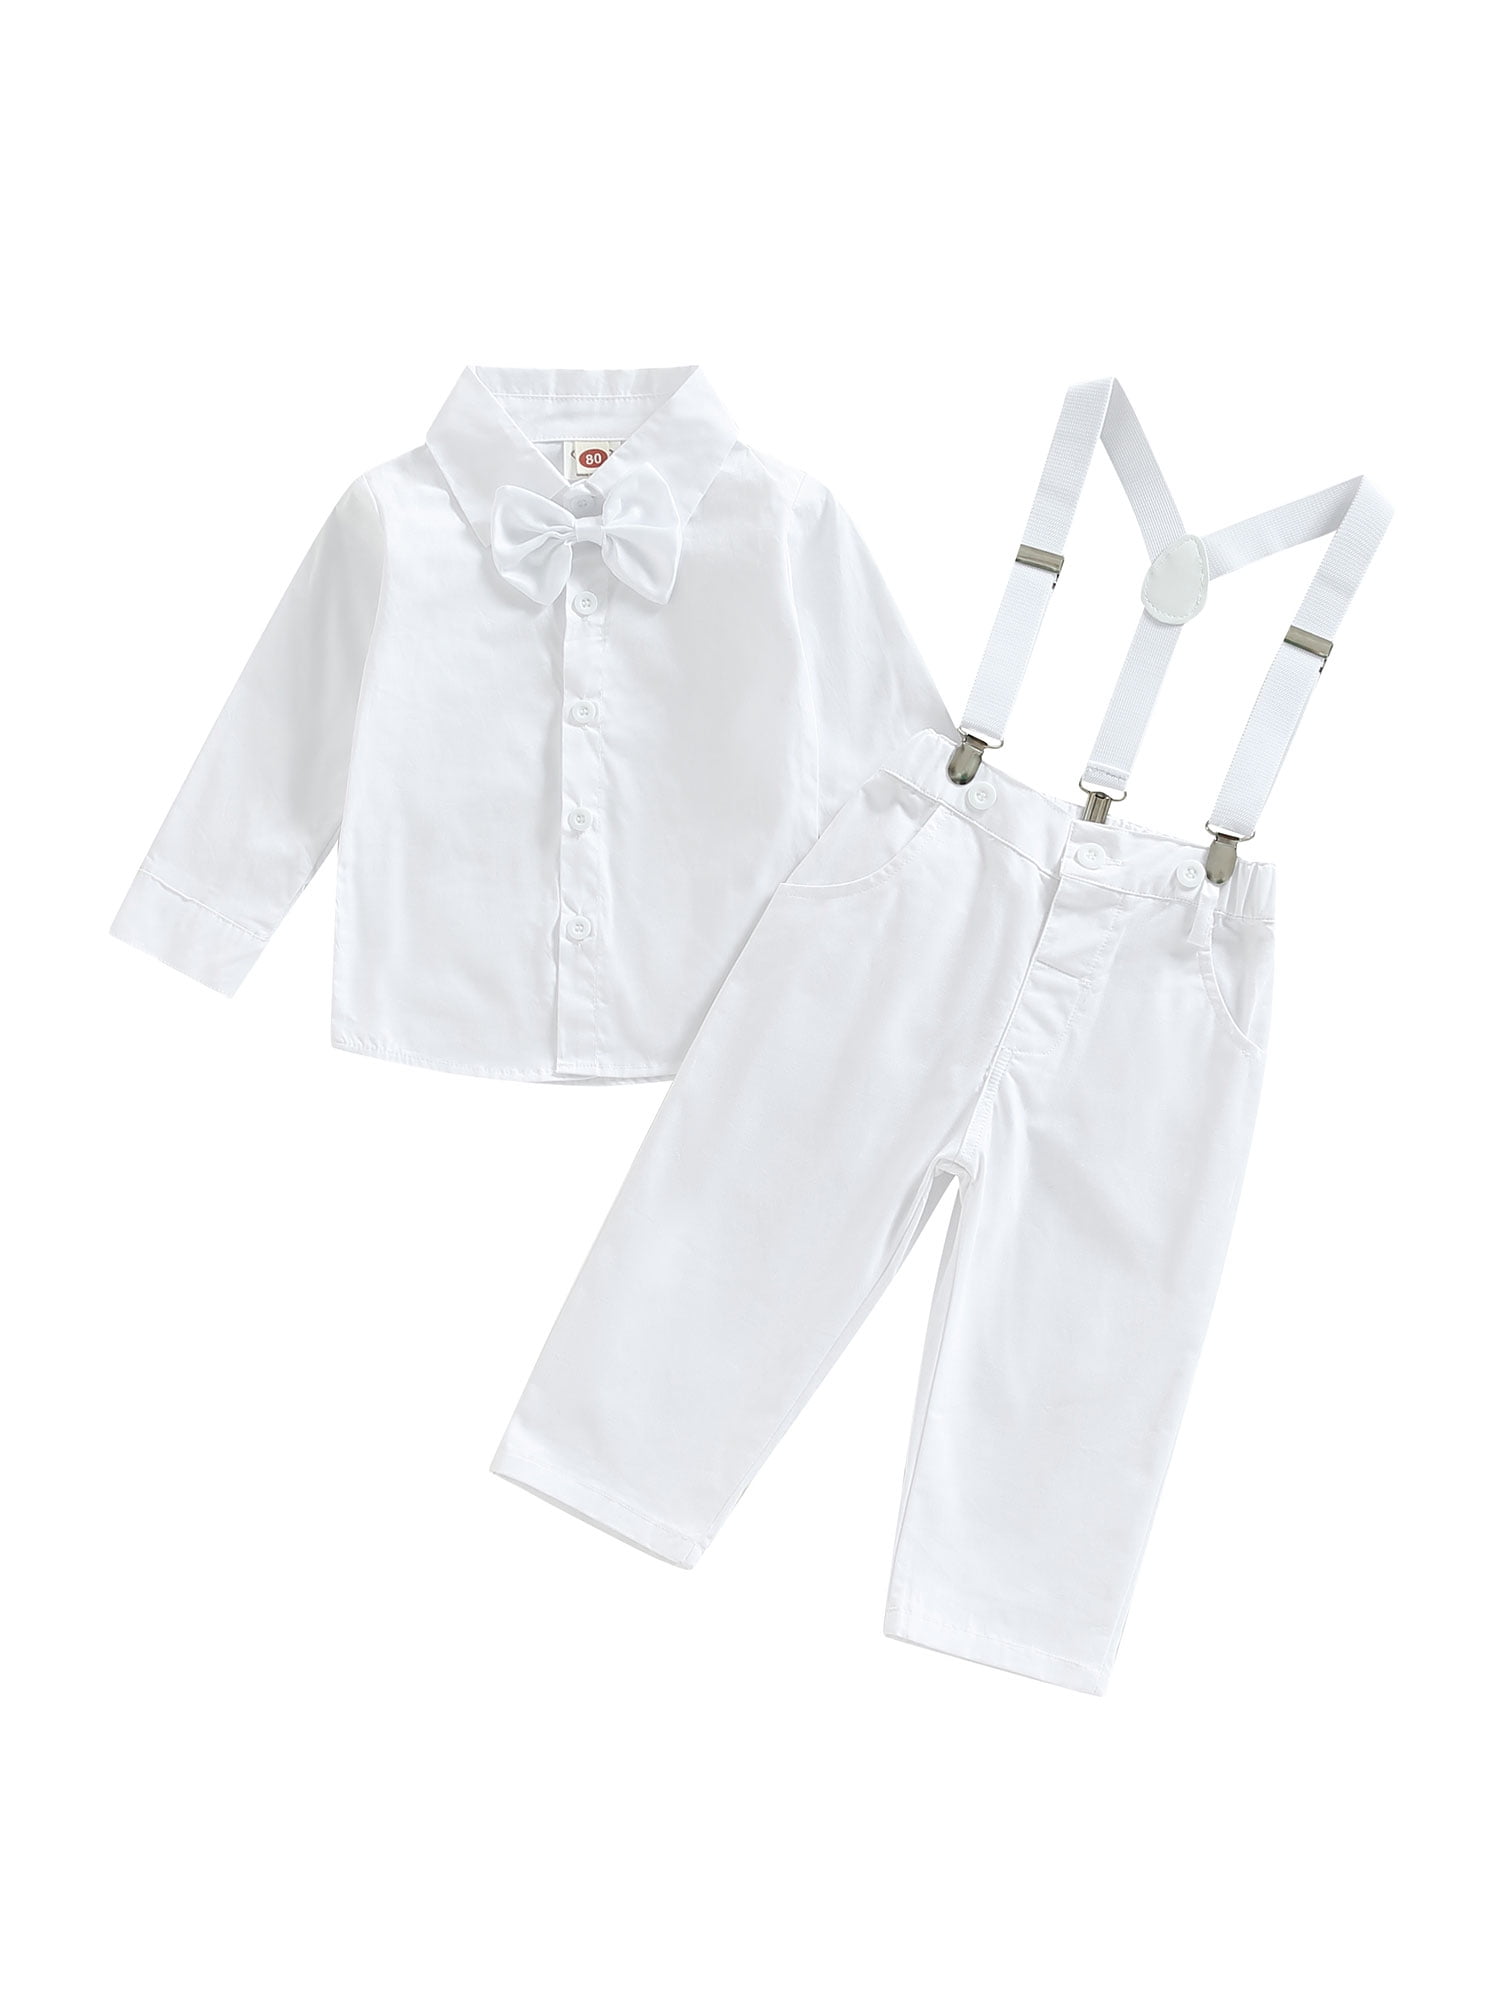 White Mens Suits Men'S 2 Piece Linen Set Short Sleeve Turn Down Collar  Shirts With Pocket And Shorts Summer Beach Pants Pure Color Set -  Walmart.com